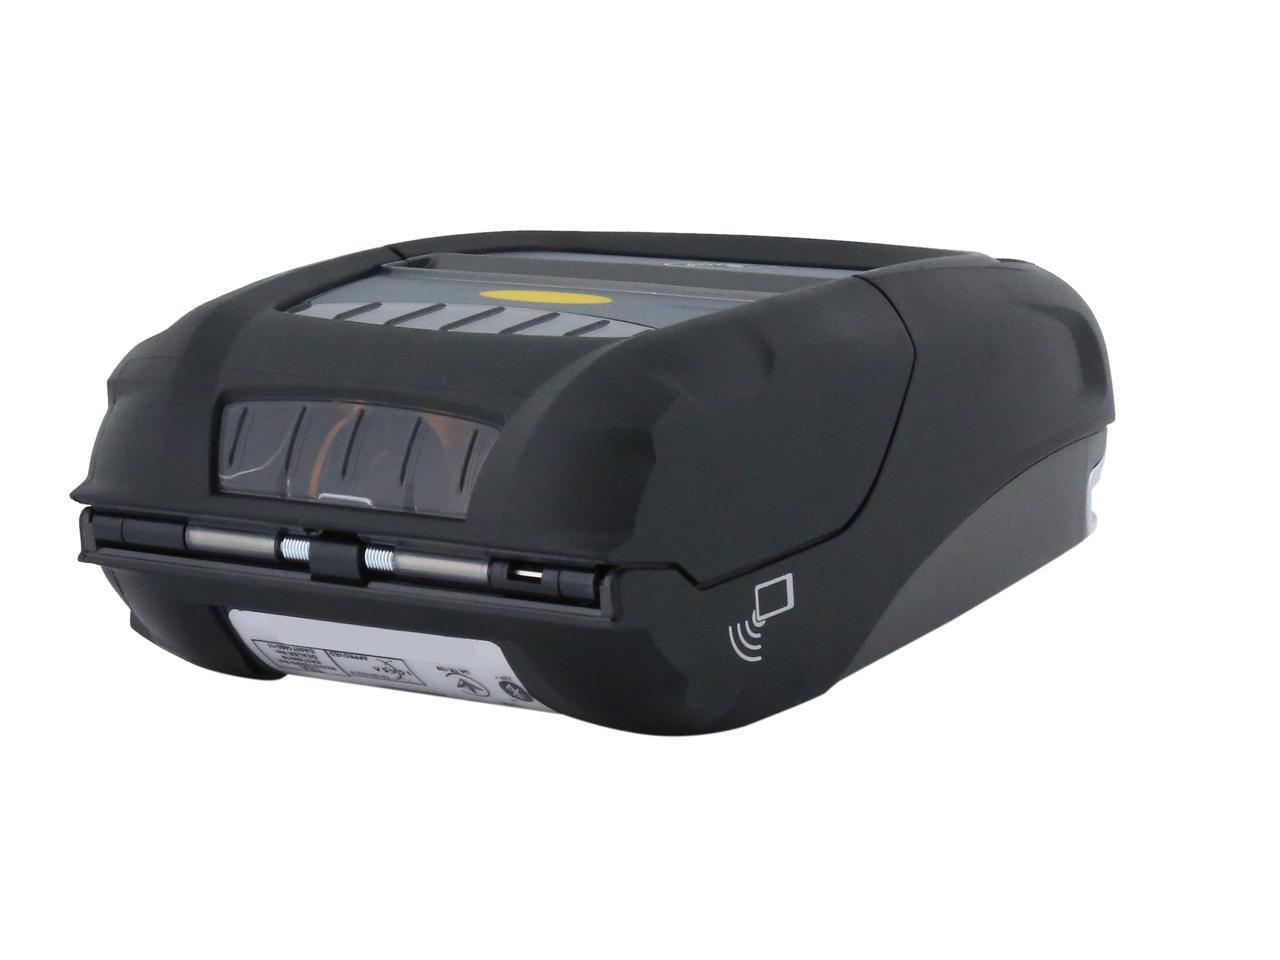 Zebra Zq510 3 Mobile Direct Thermal Receipt And Label Printer 203 Dpi Bluetooth 40 Linered 1163